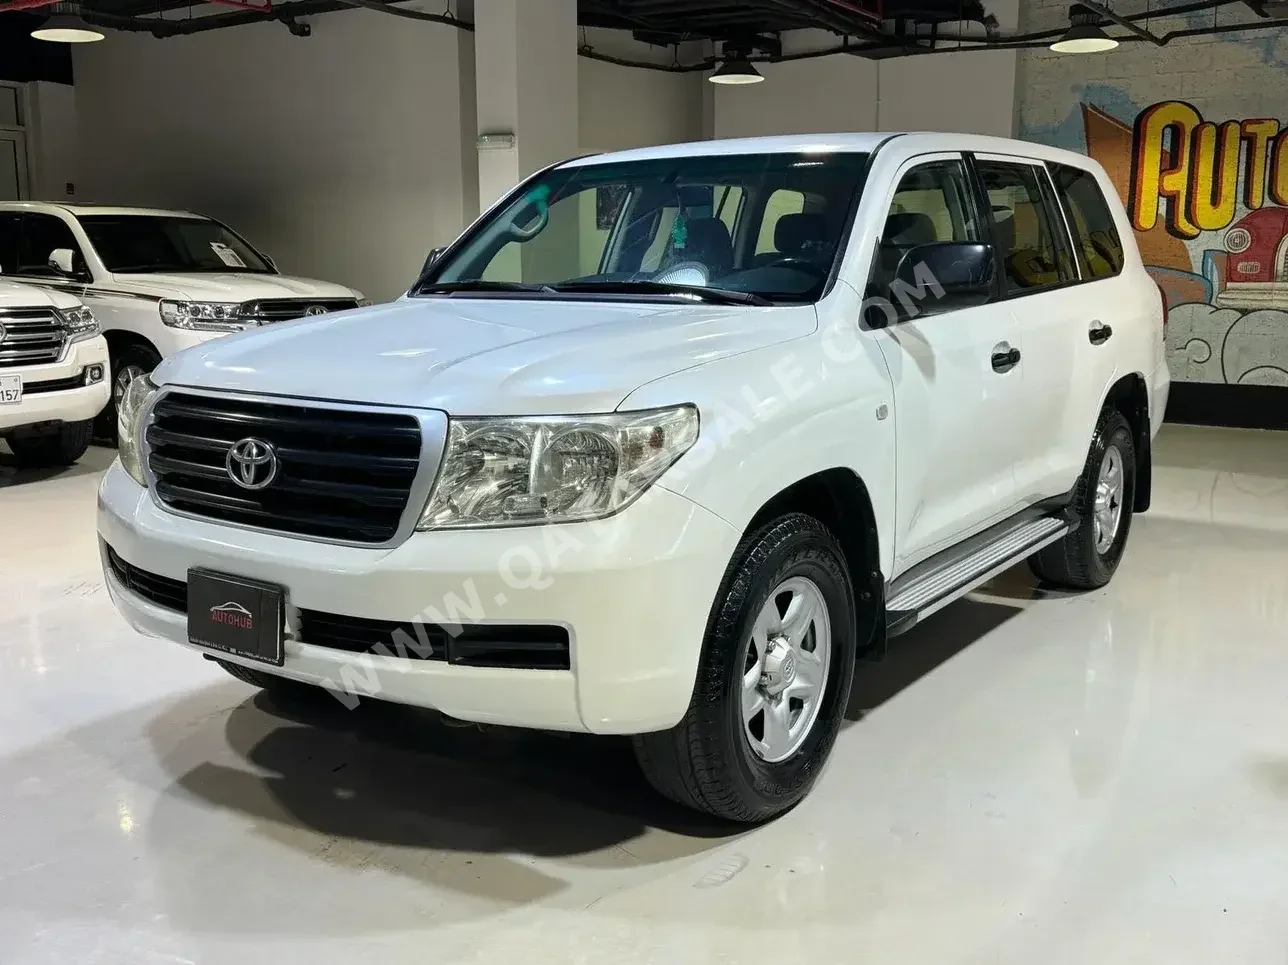 Toyota  Land Cruiser  G  2011  Automatic  474,000 Km  6 Cylinder  Four Wheel Drive (4WD)  SUV  White